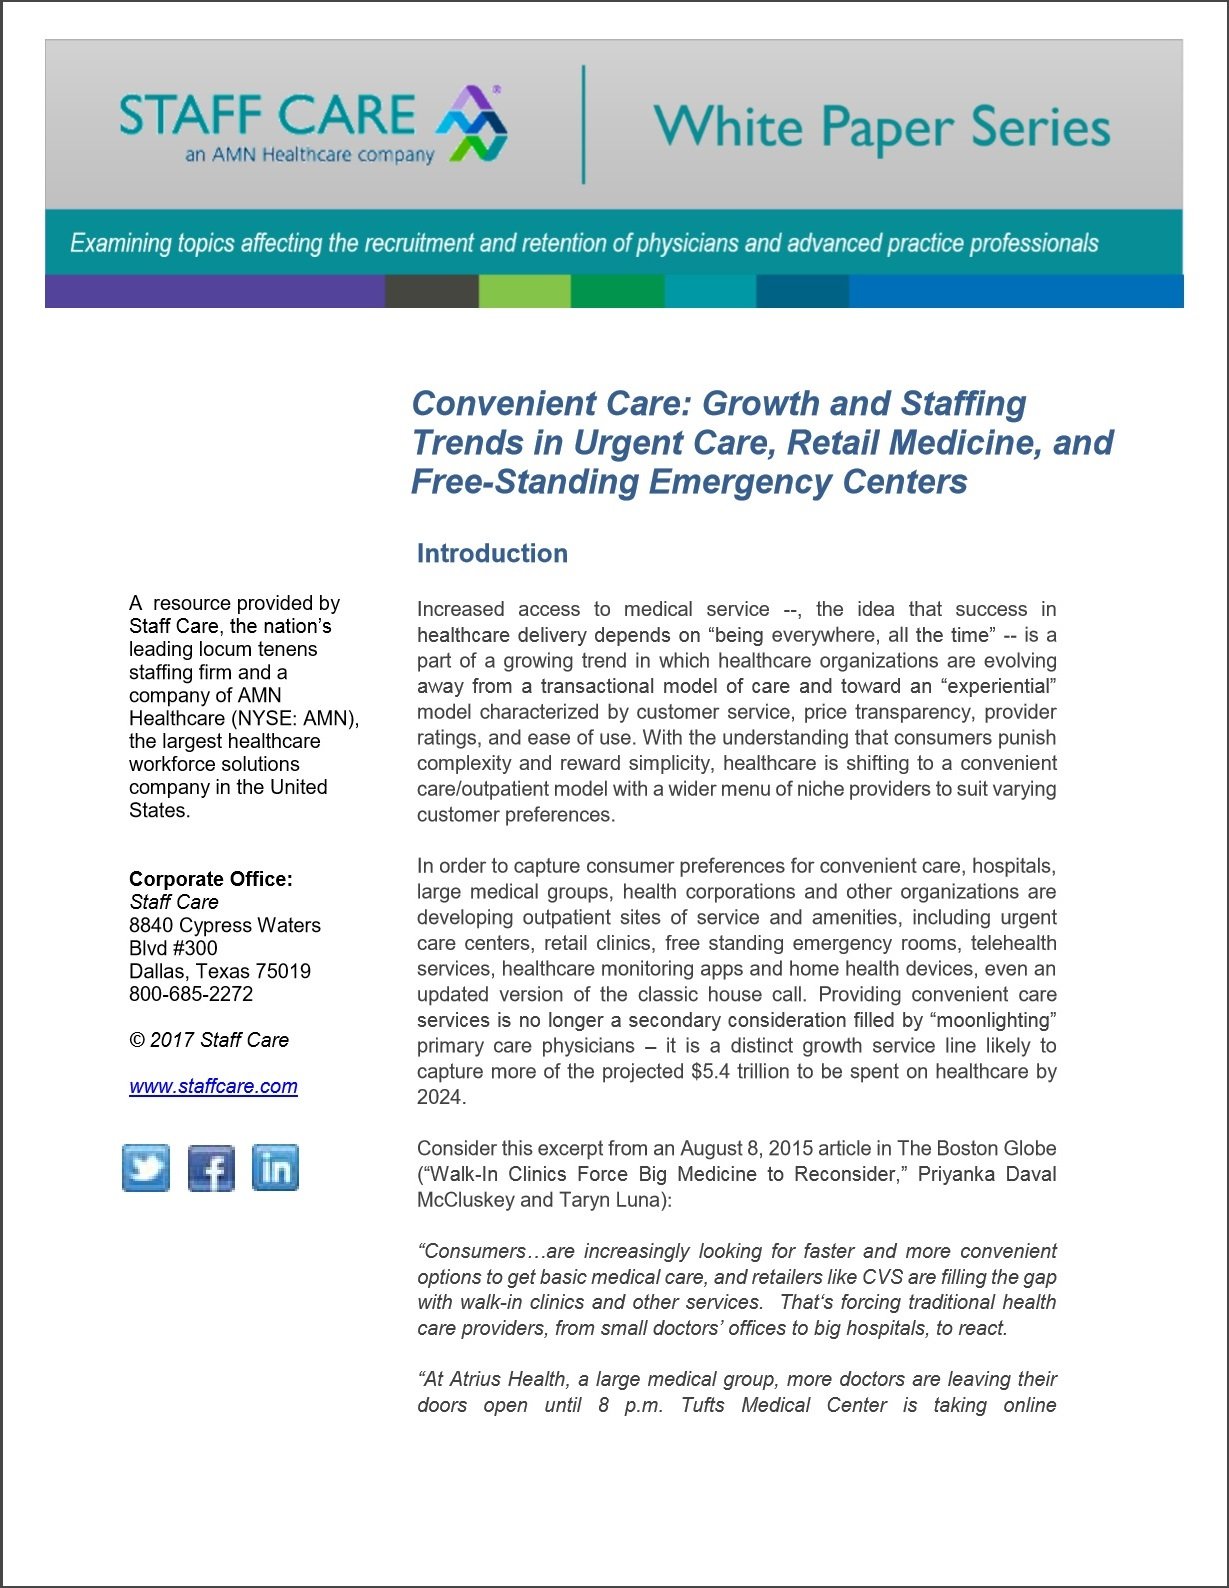 Trends in Convenient Care: A White Paper from Staff Care